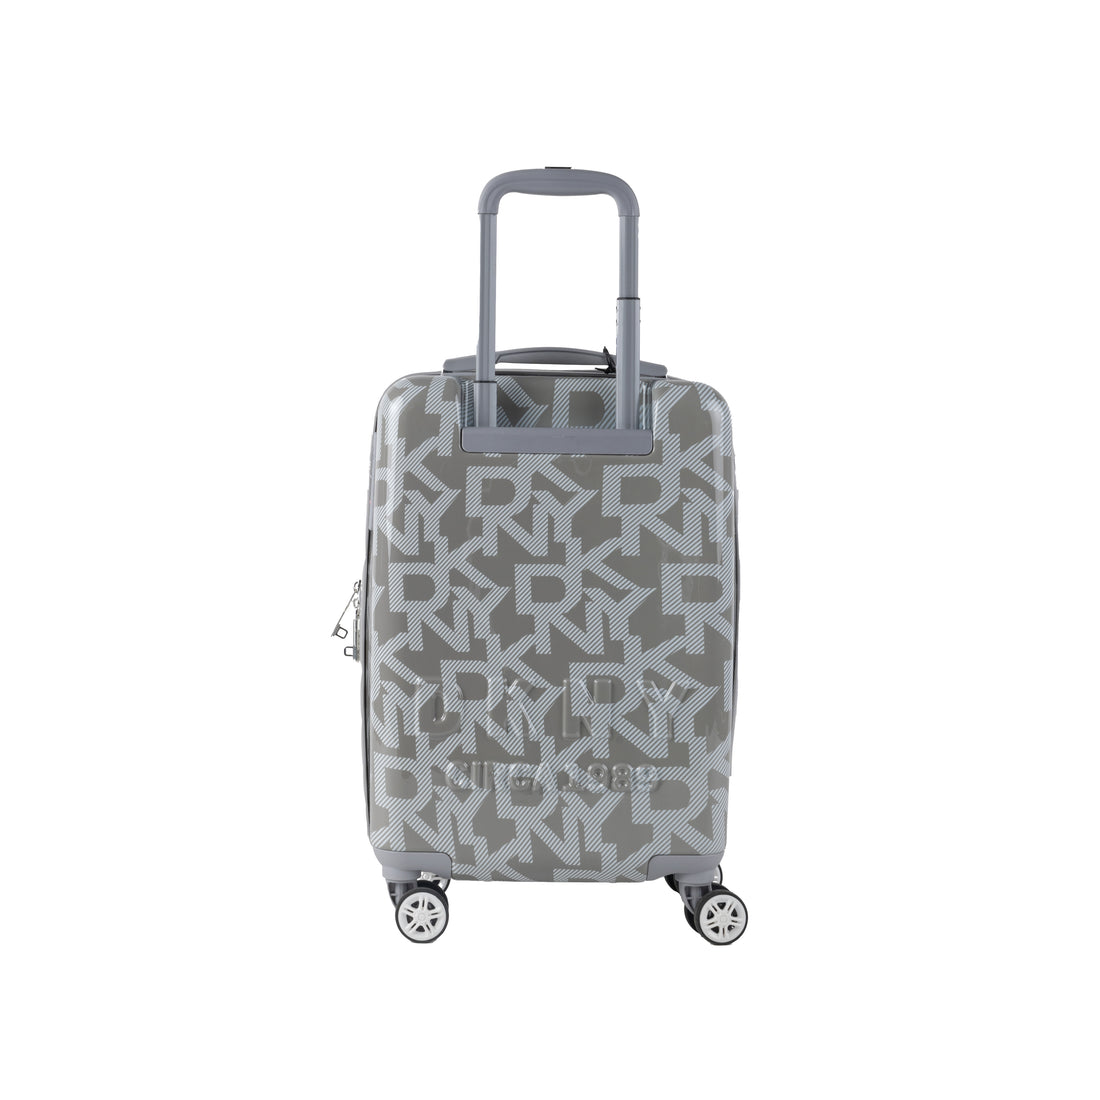 DKNY Multi-Color Cabin Luggage